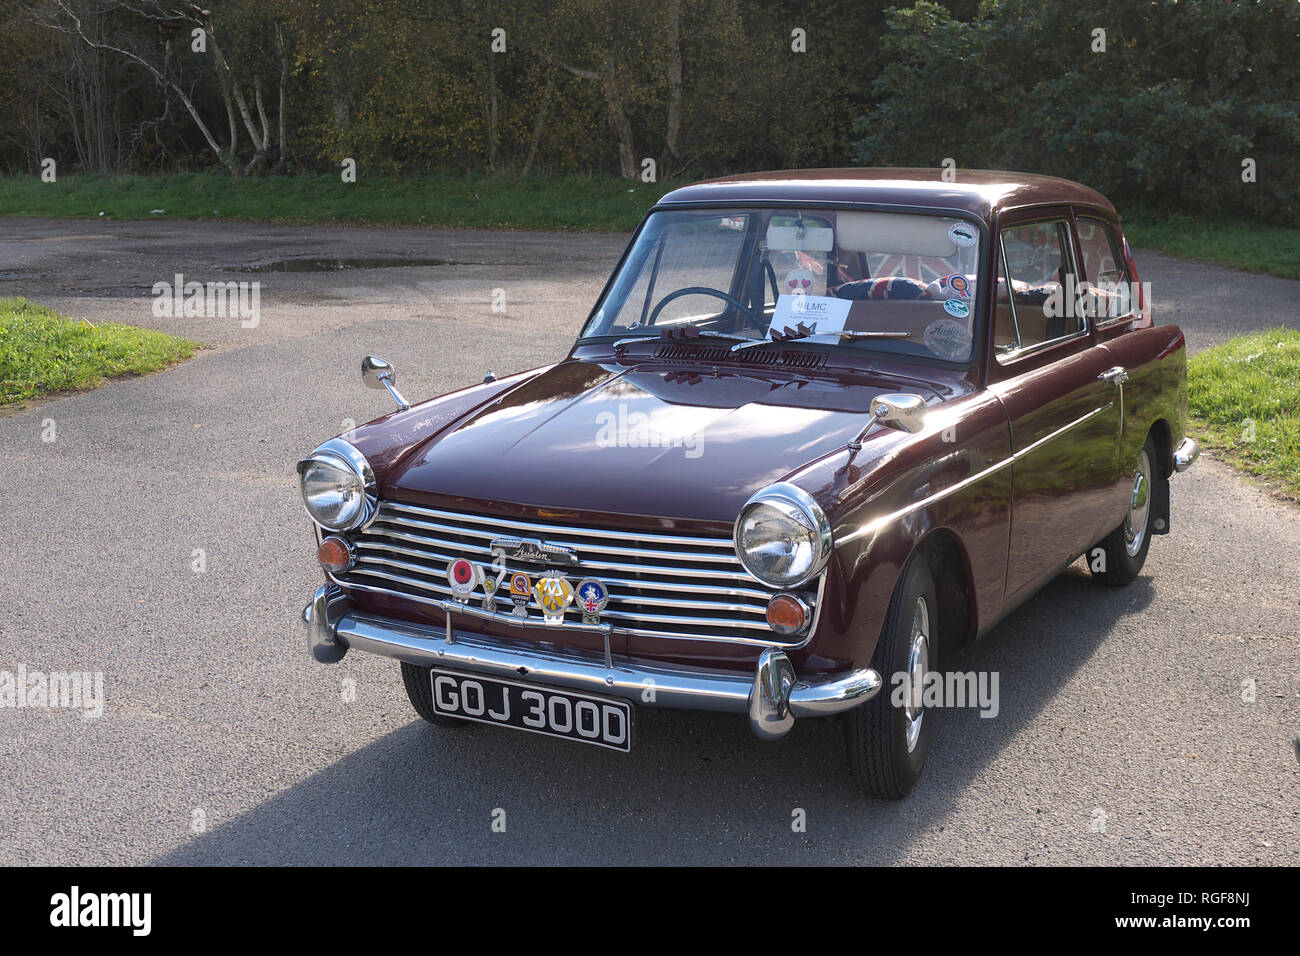 Classic 1966 Austin A40 Farina at Willingham woods Stock Photo